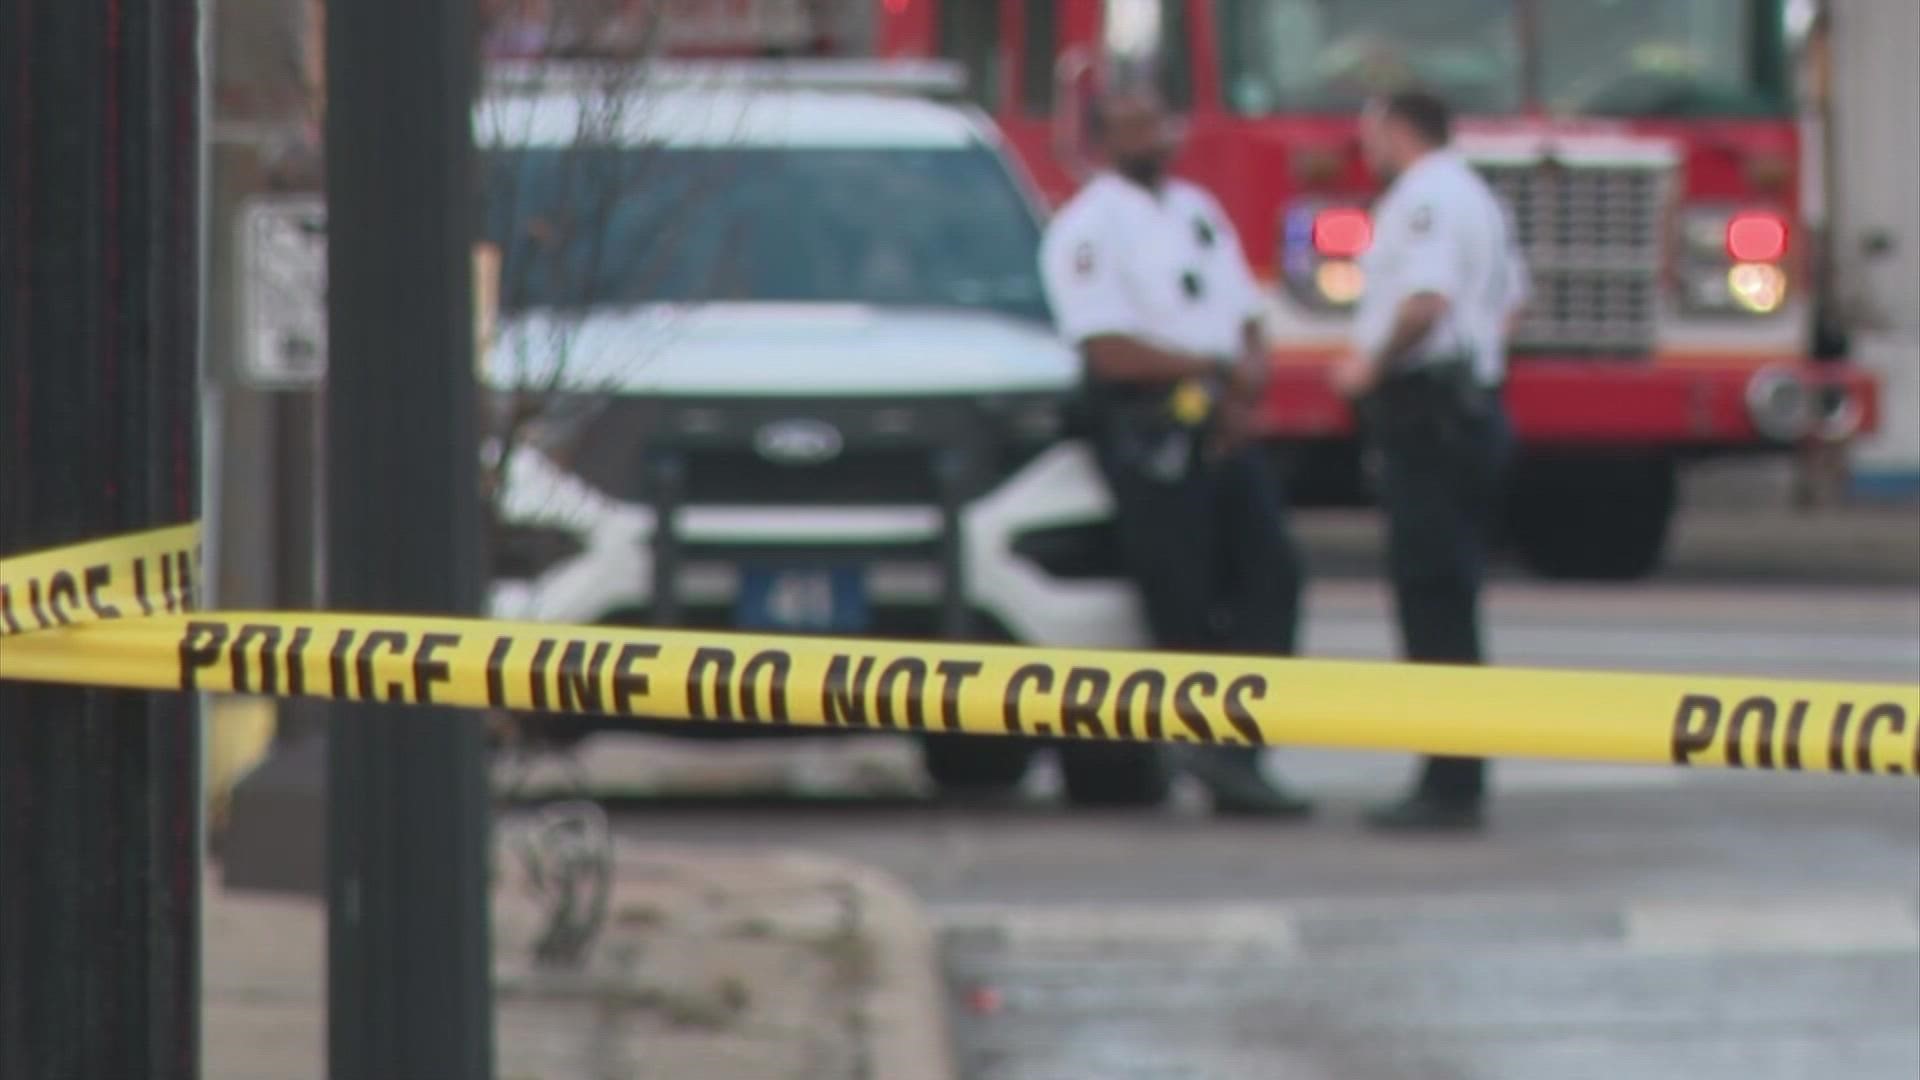 Two people were injured after a reported shooting on the city's northeast side Sunday afternoon.